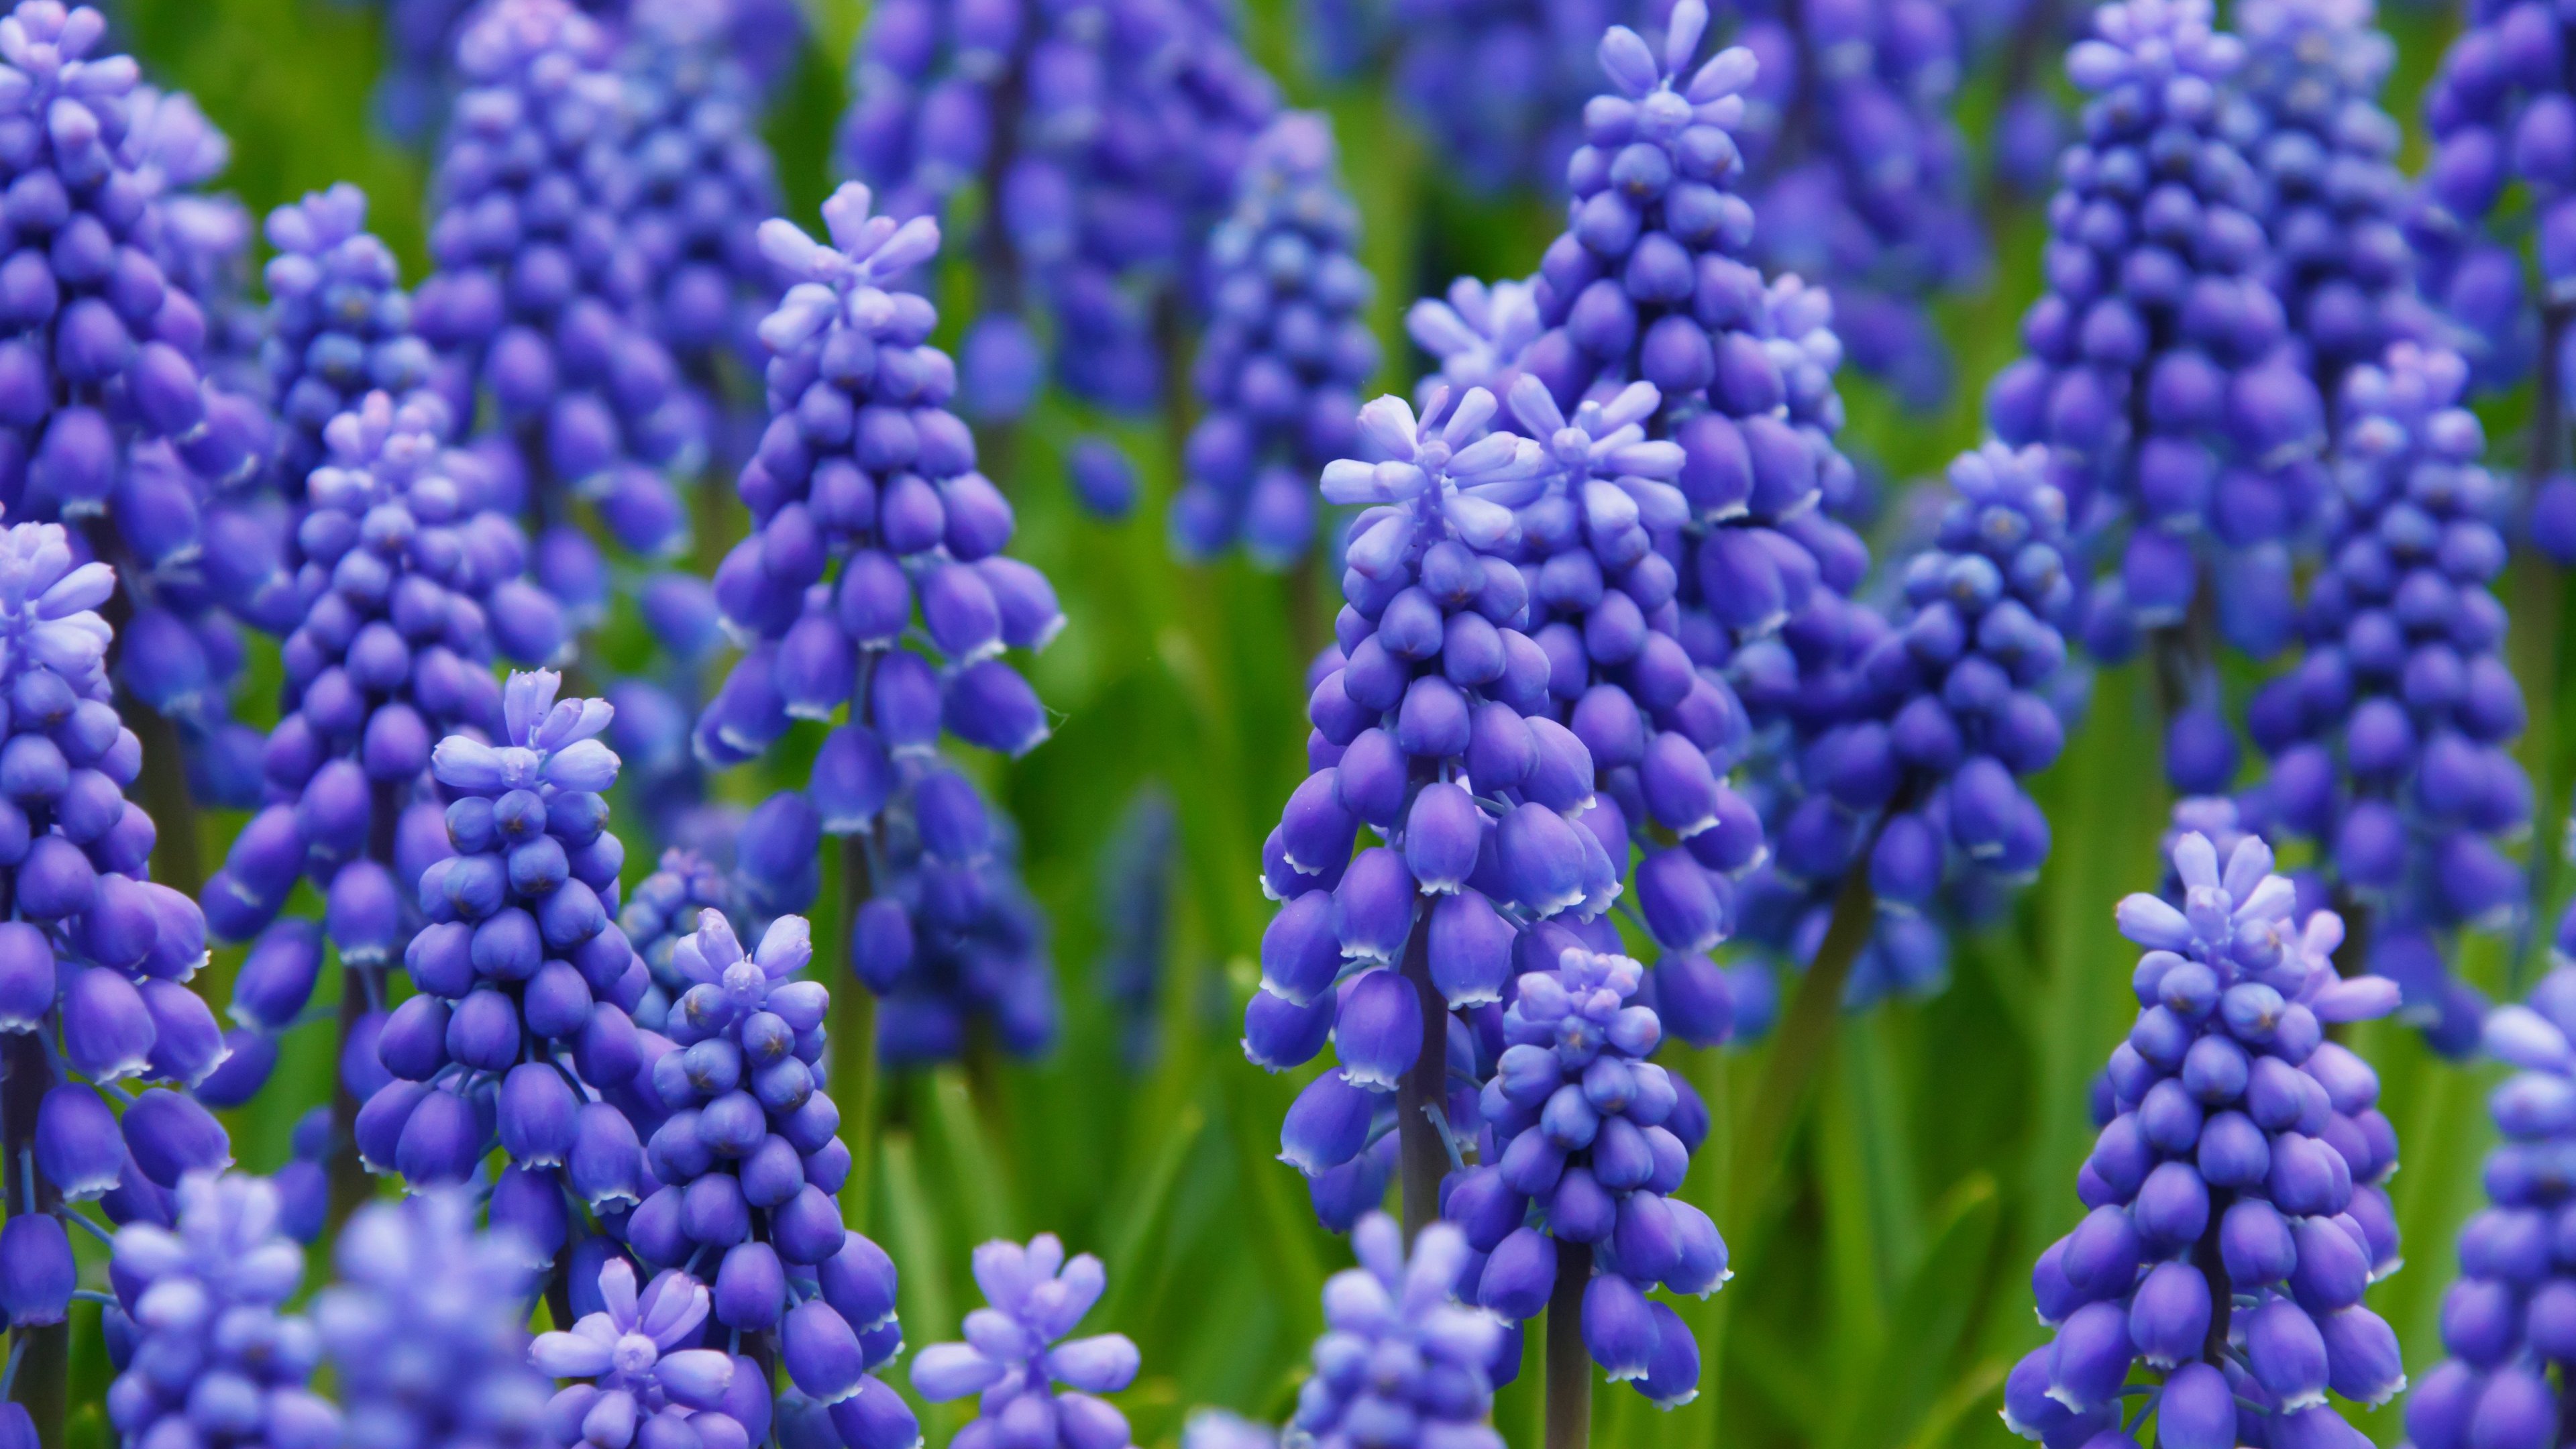 Grape Hyacinth Wallpaper Iphone Android Desktop Backgrounds Images, Photos, Reviews